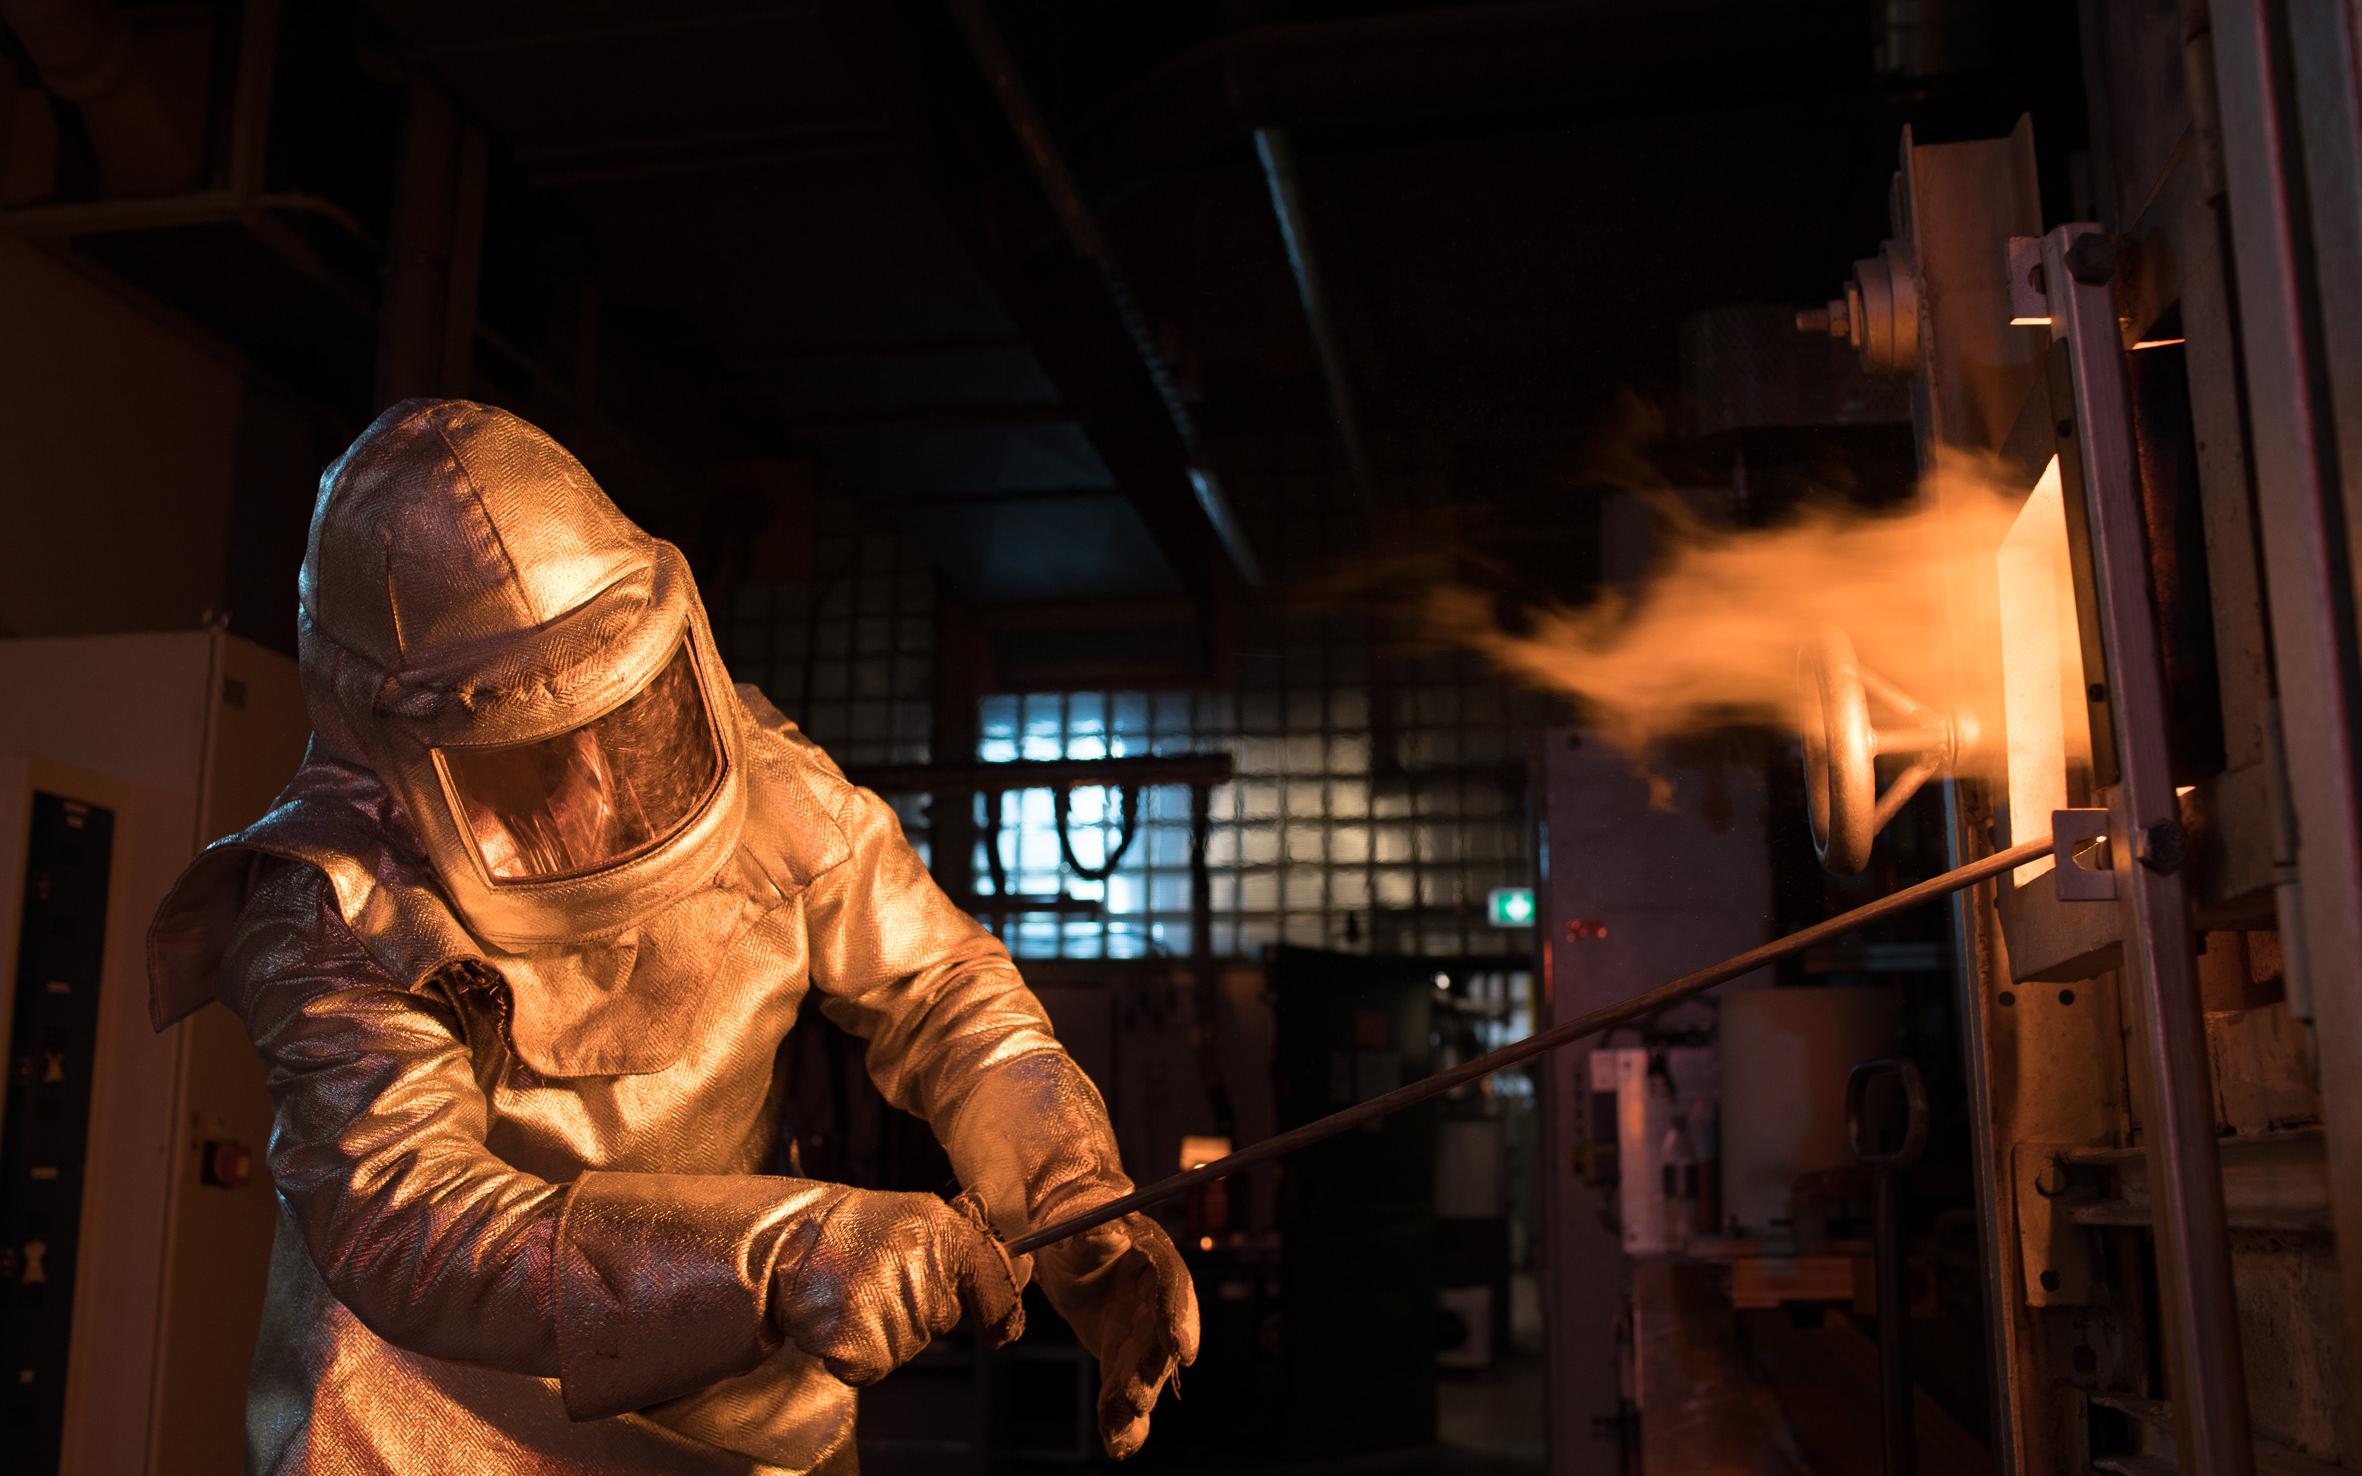 SCHOTT worker in protective clothing next to glass melting tank